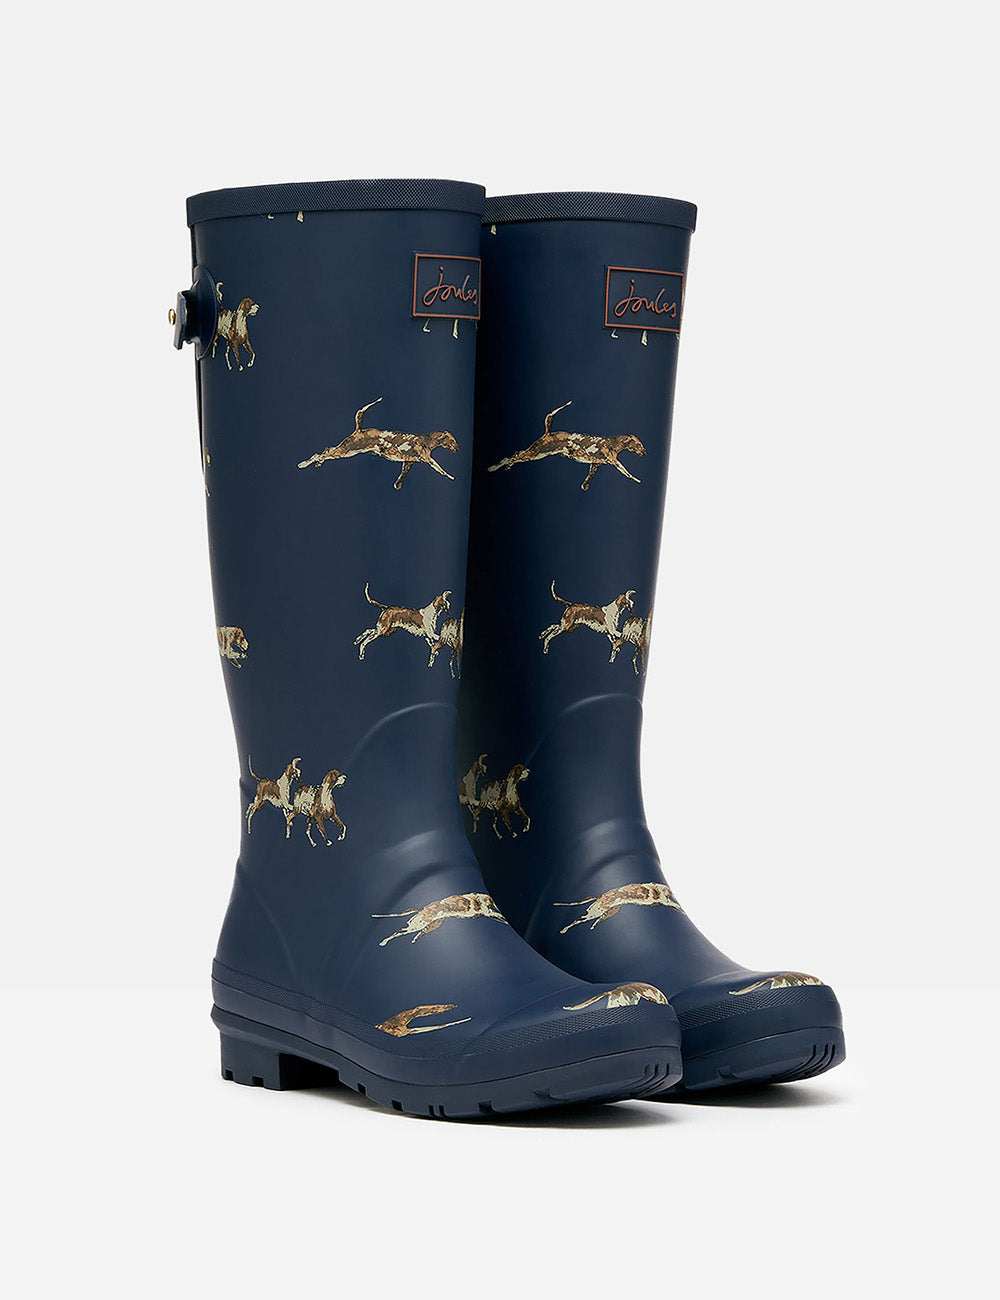 Joules Tall Printed Welly - Navy Dog